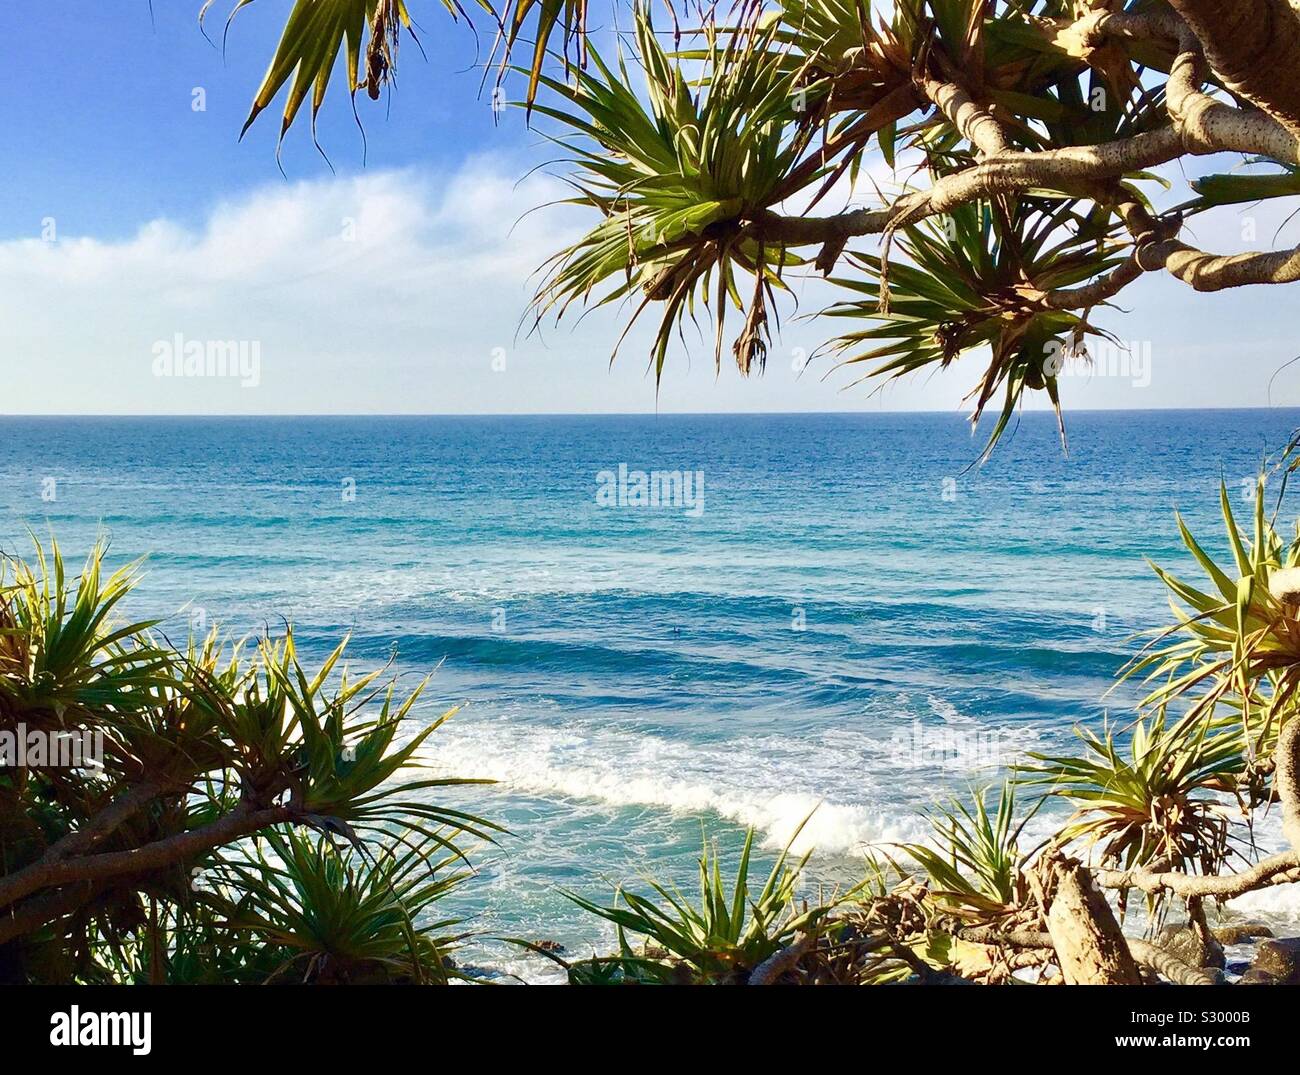 Burleigh Heads Banque D'Images